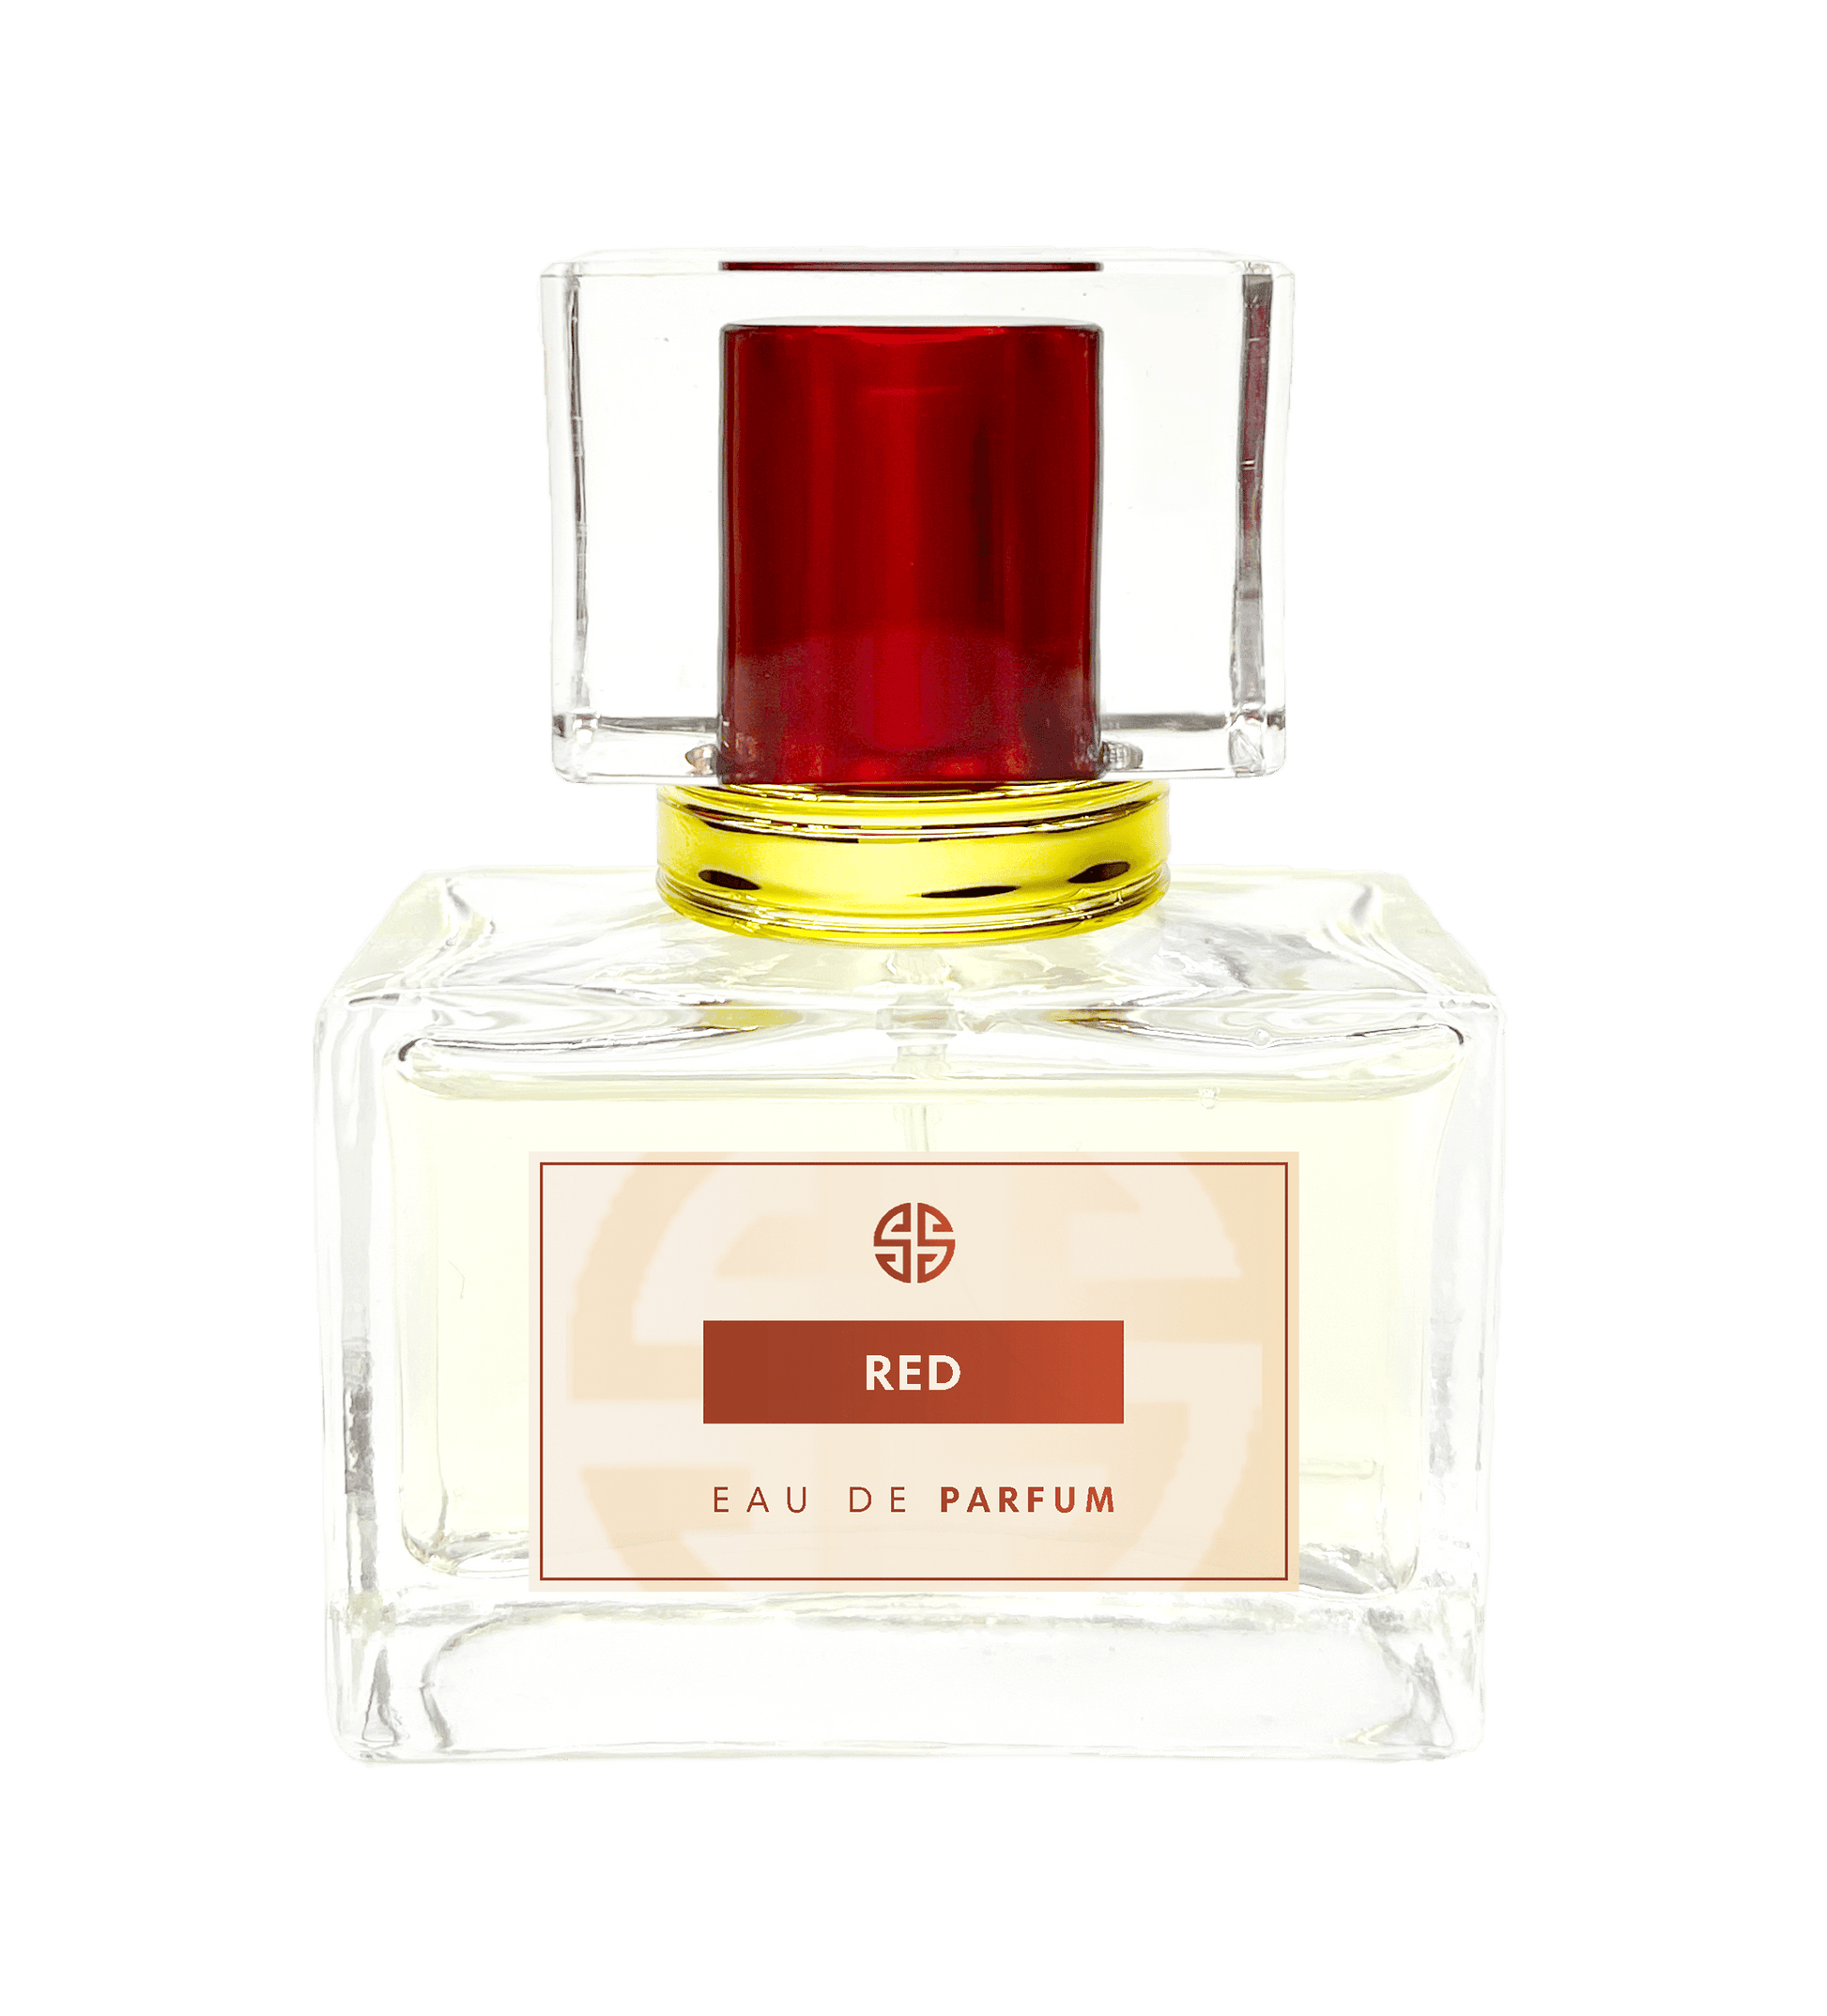 Baccarat Rouge 540 parfum - Similar Scent RED - undefined